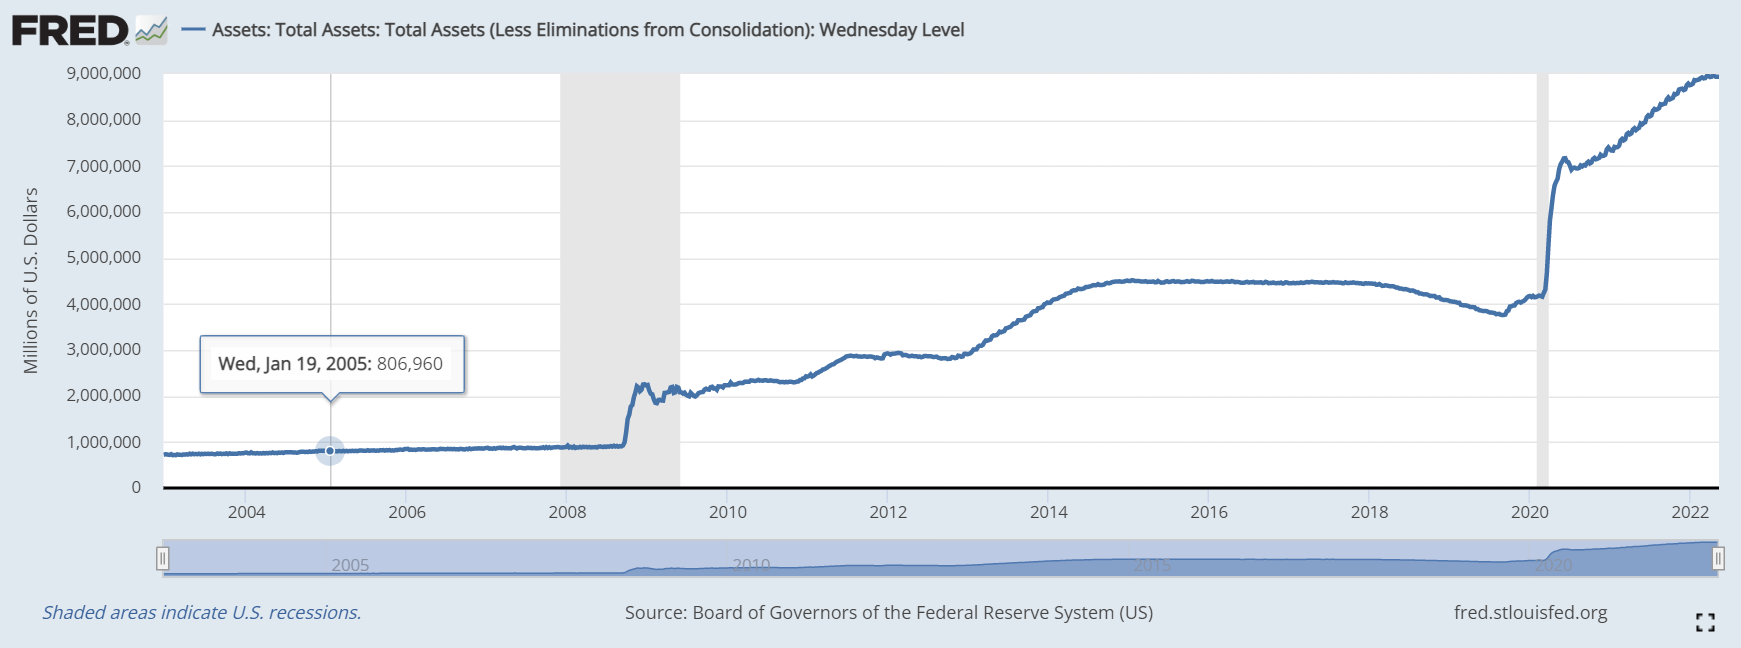 The Fed's balance sheet has grown to nearly $9 Trillion in 2022